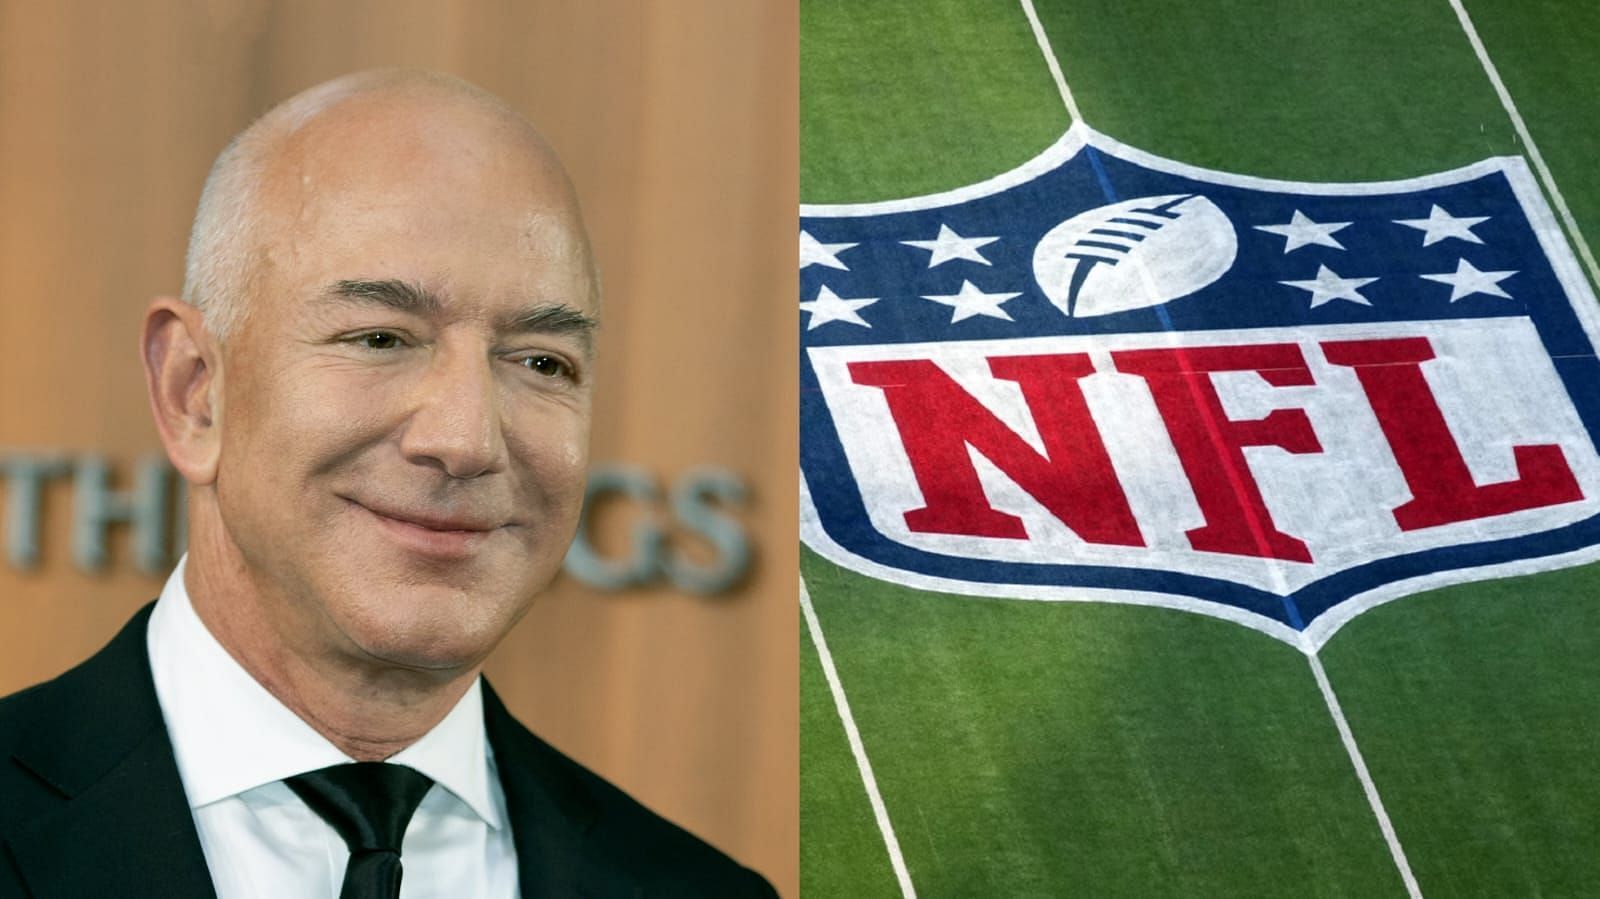 Jeff Bezos is rumored to be eyeing a new NFL franchise to potentially takeover